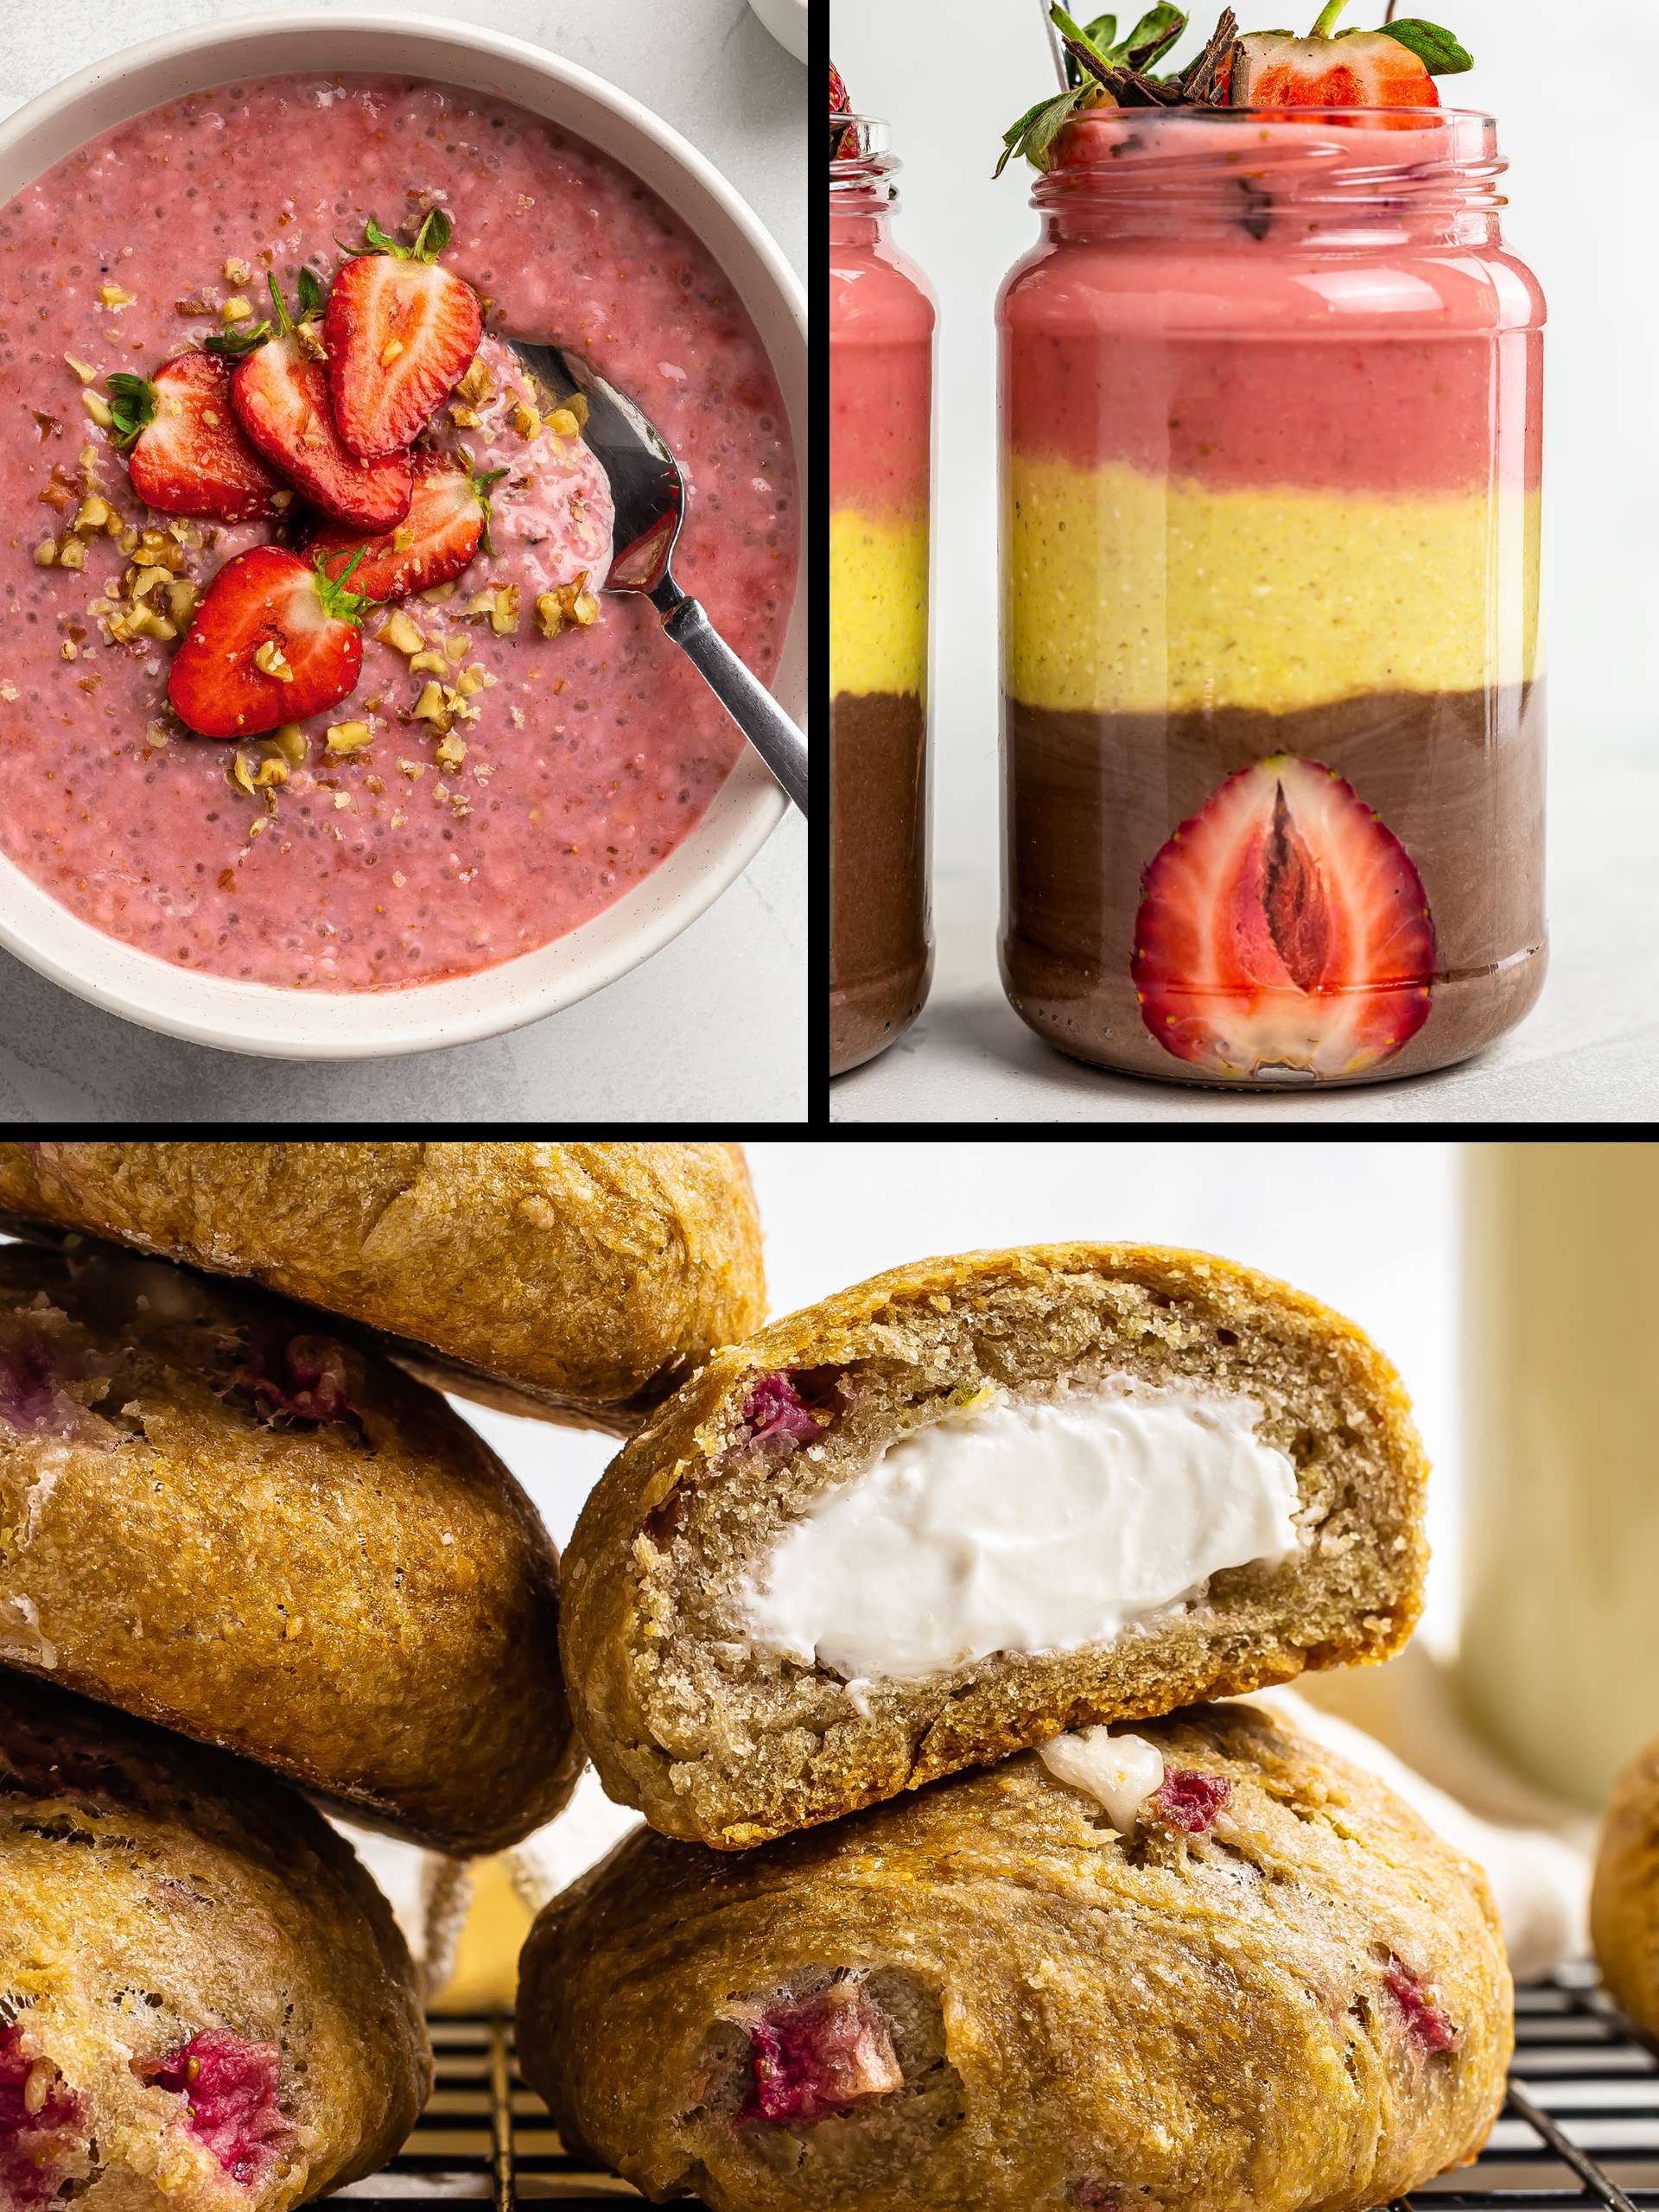 Easy & Healthy Strawberry Recipes for Breakfast